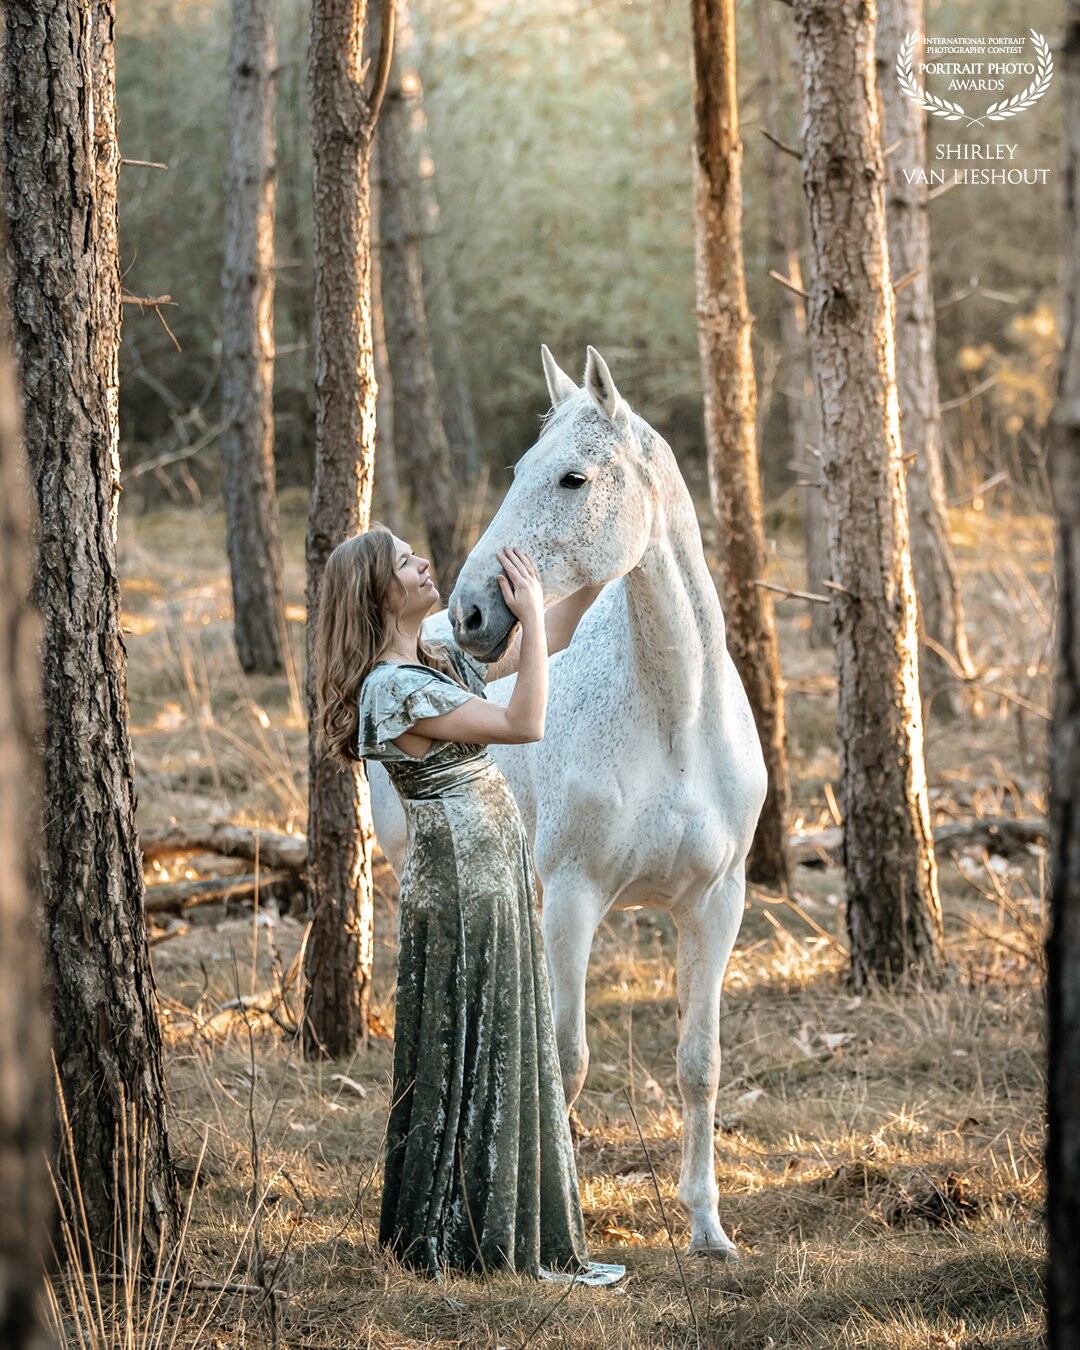 In this picture lovely Sharon with her sweet and well-behaved horse Cumlaude. Although this photo was taken at the end of February it looks like a Summer picture to me. The beautiful green, velvet dress and the location in the woods gives this photo a bit of a fairytale touch.